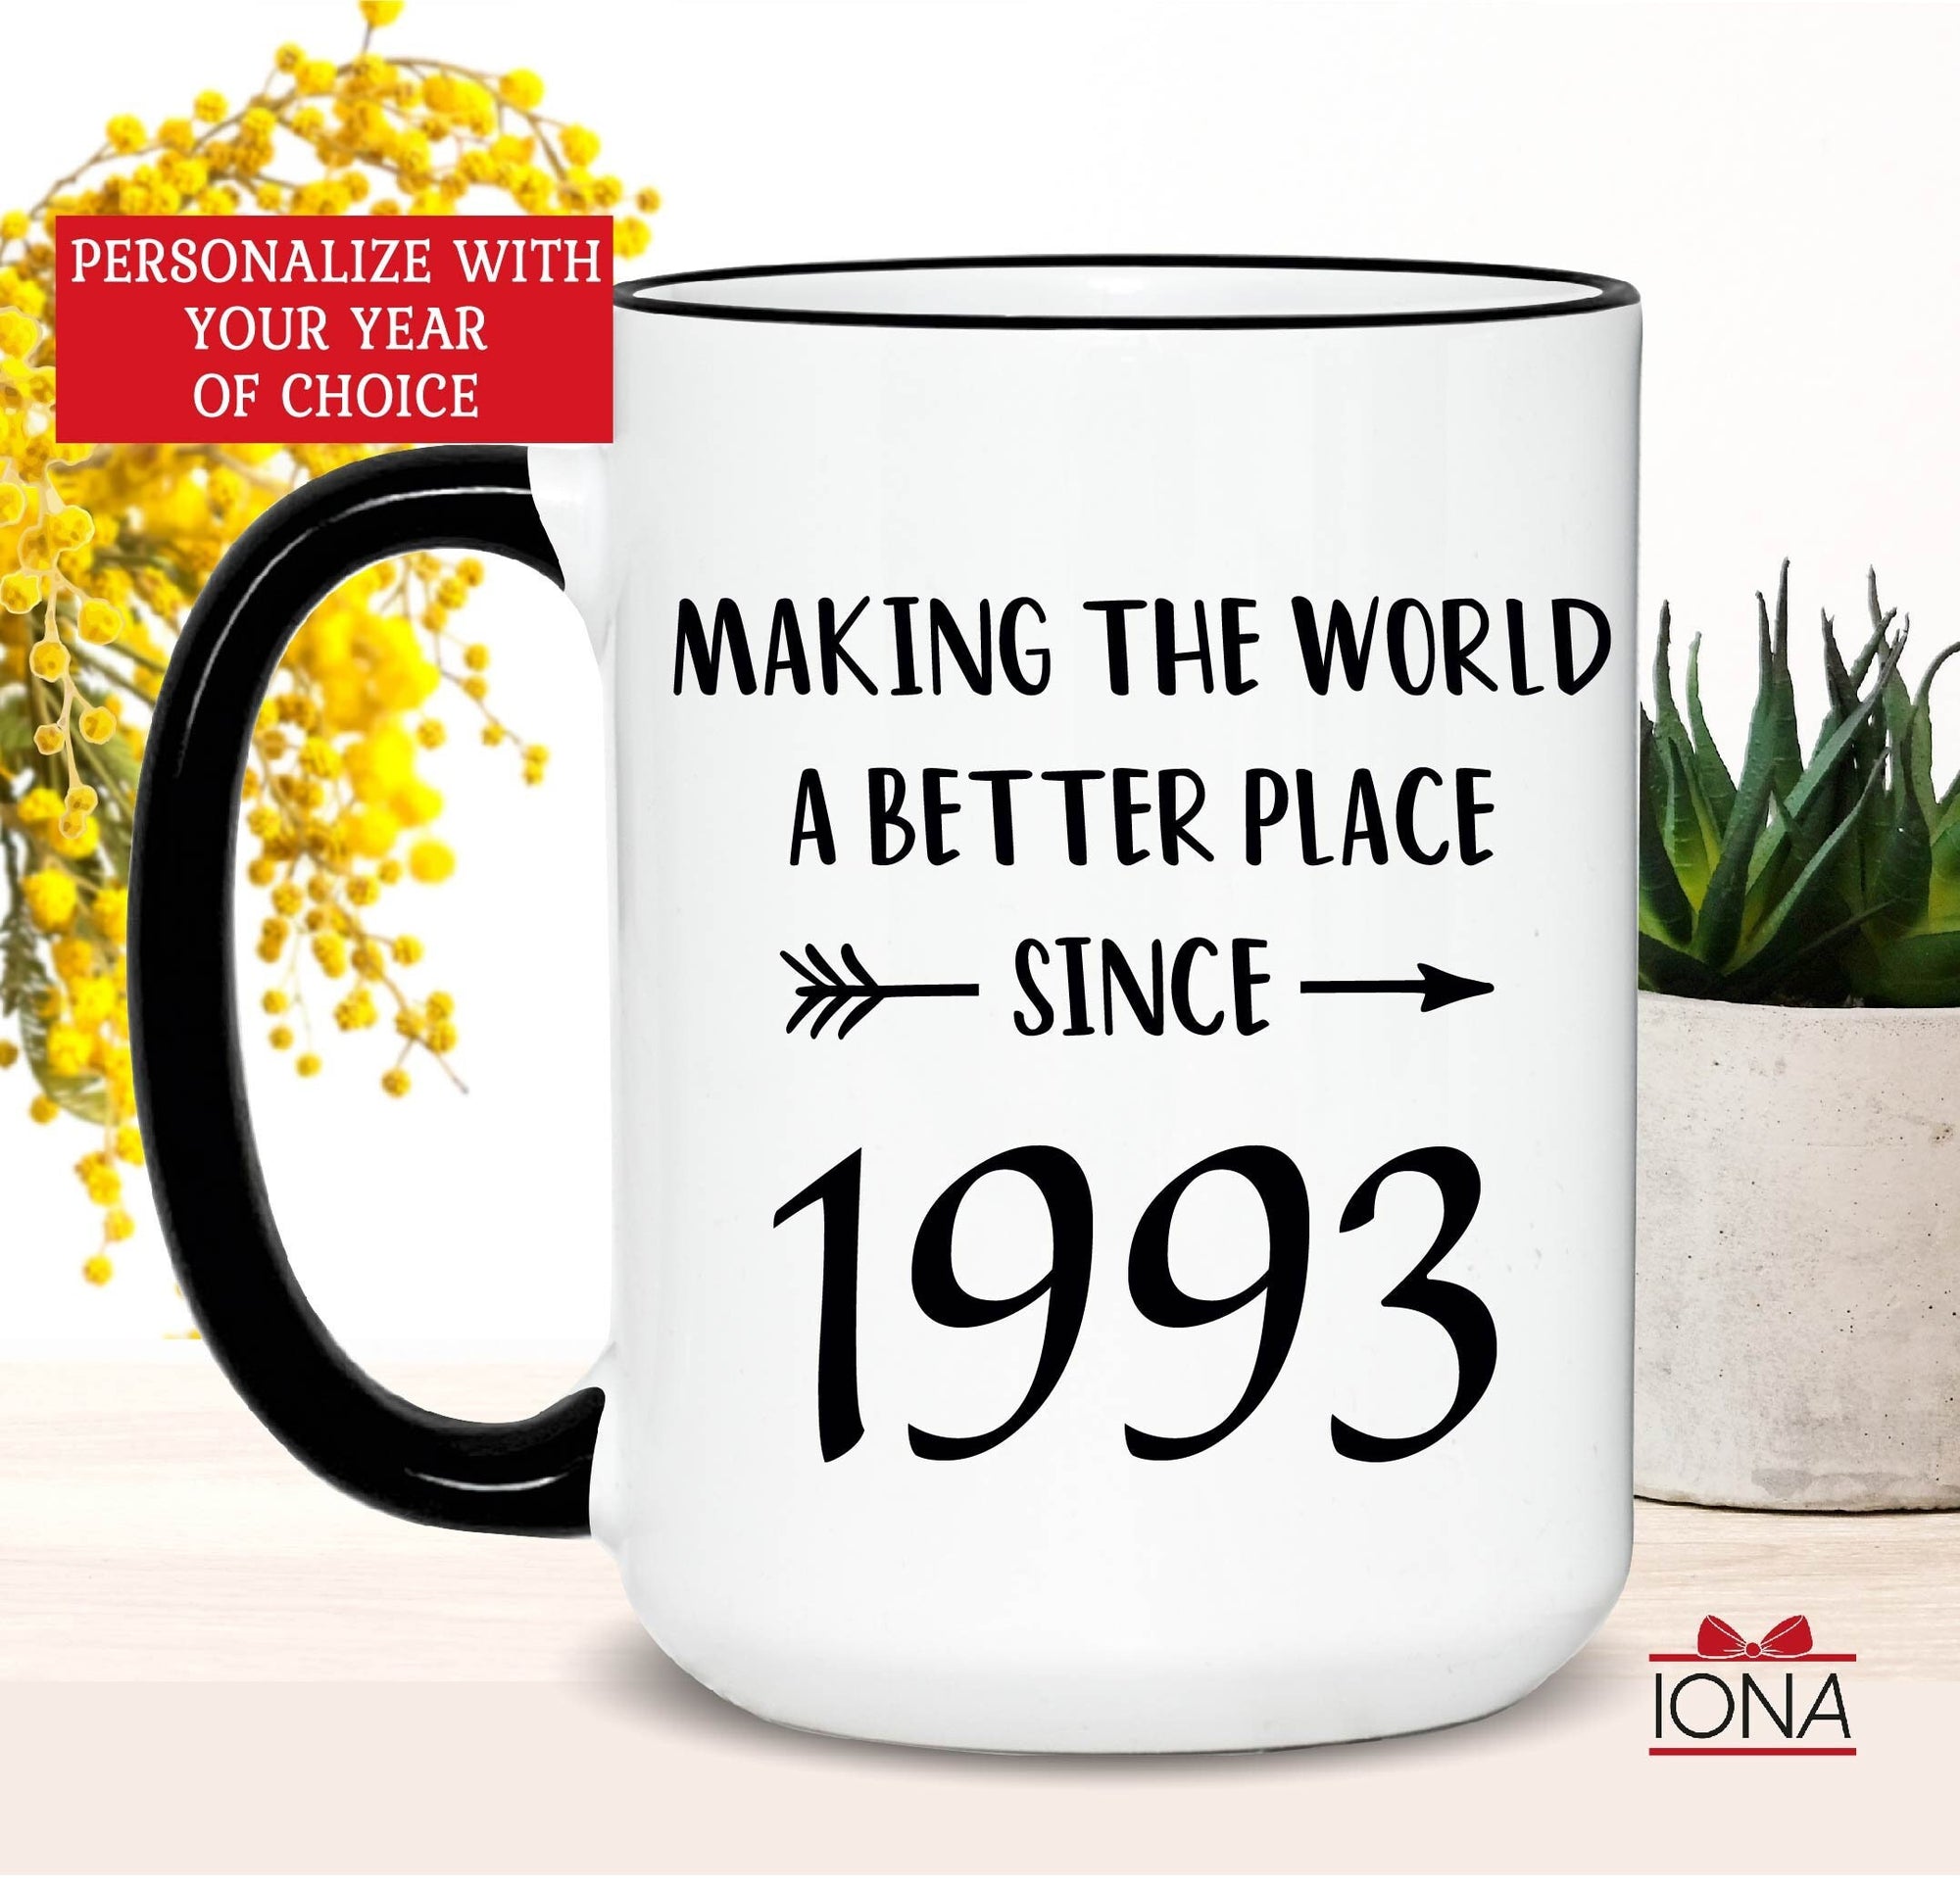 30th Birthday Gift, Personalized 30th Birthday Coffee Mug, Born in 1993, Making the world a better place since 1993, Best Friends 30th Gifts